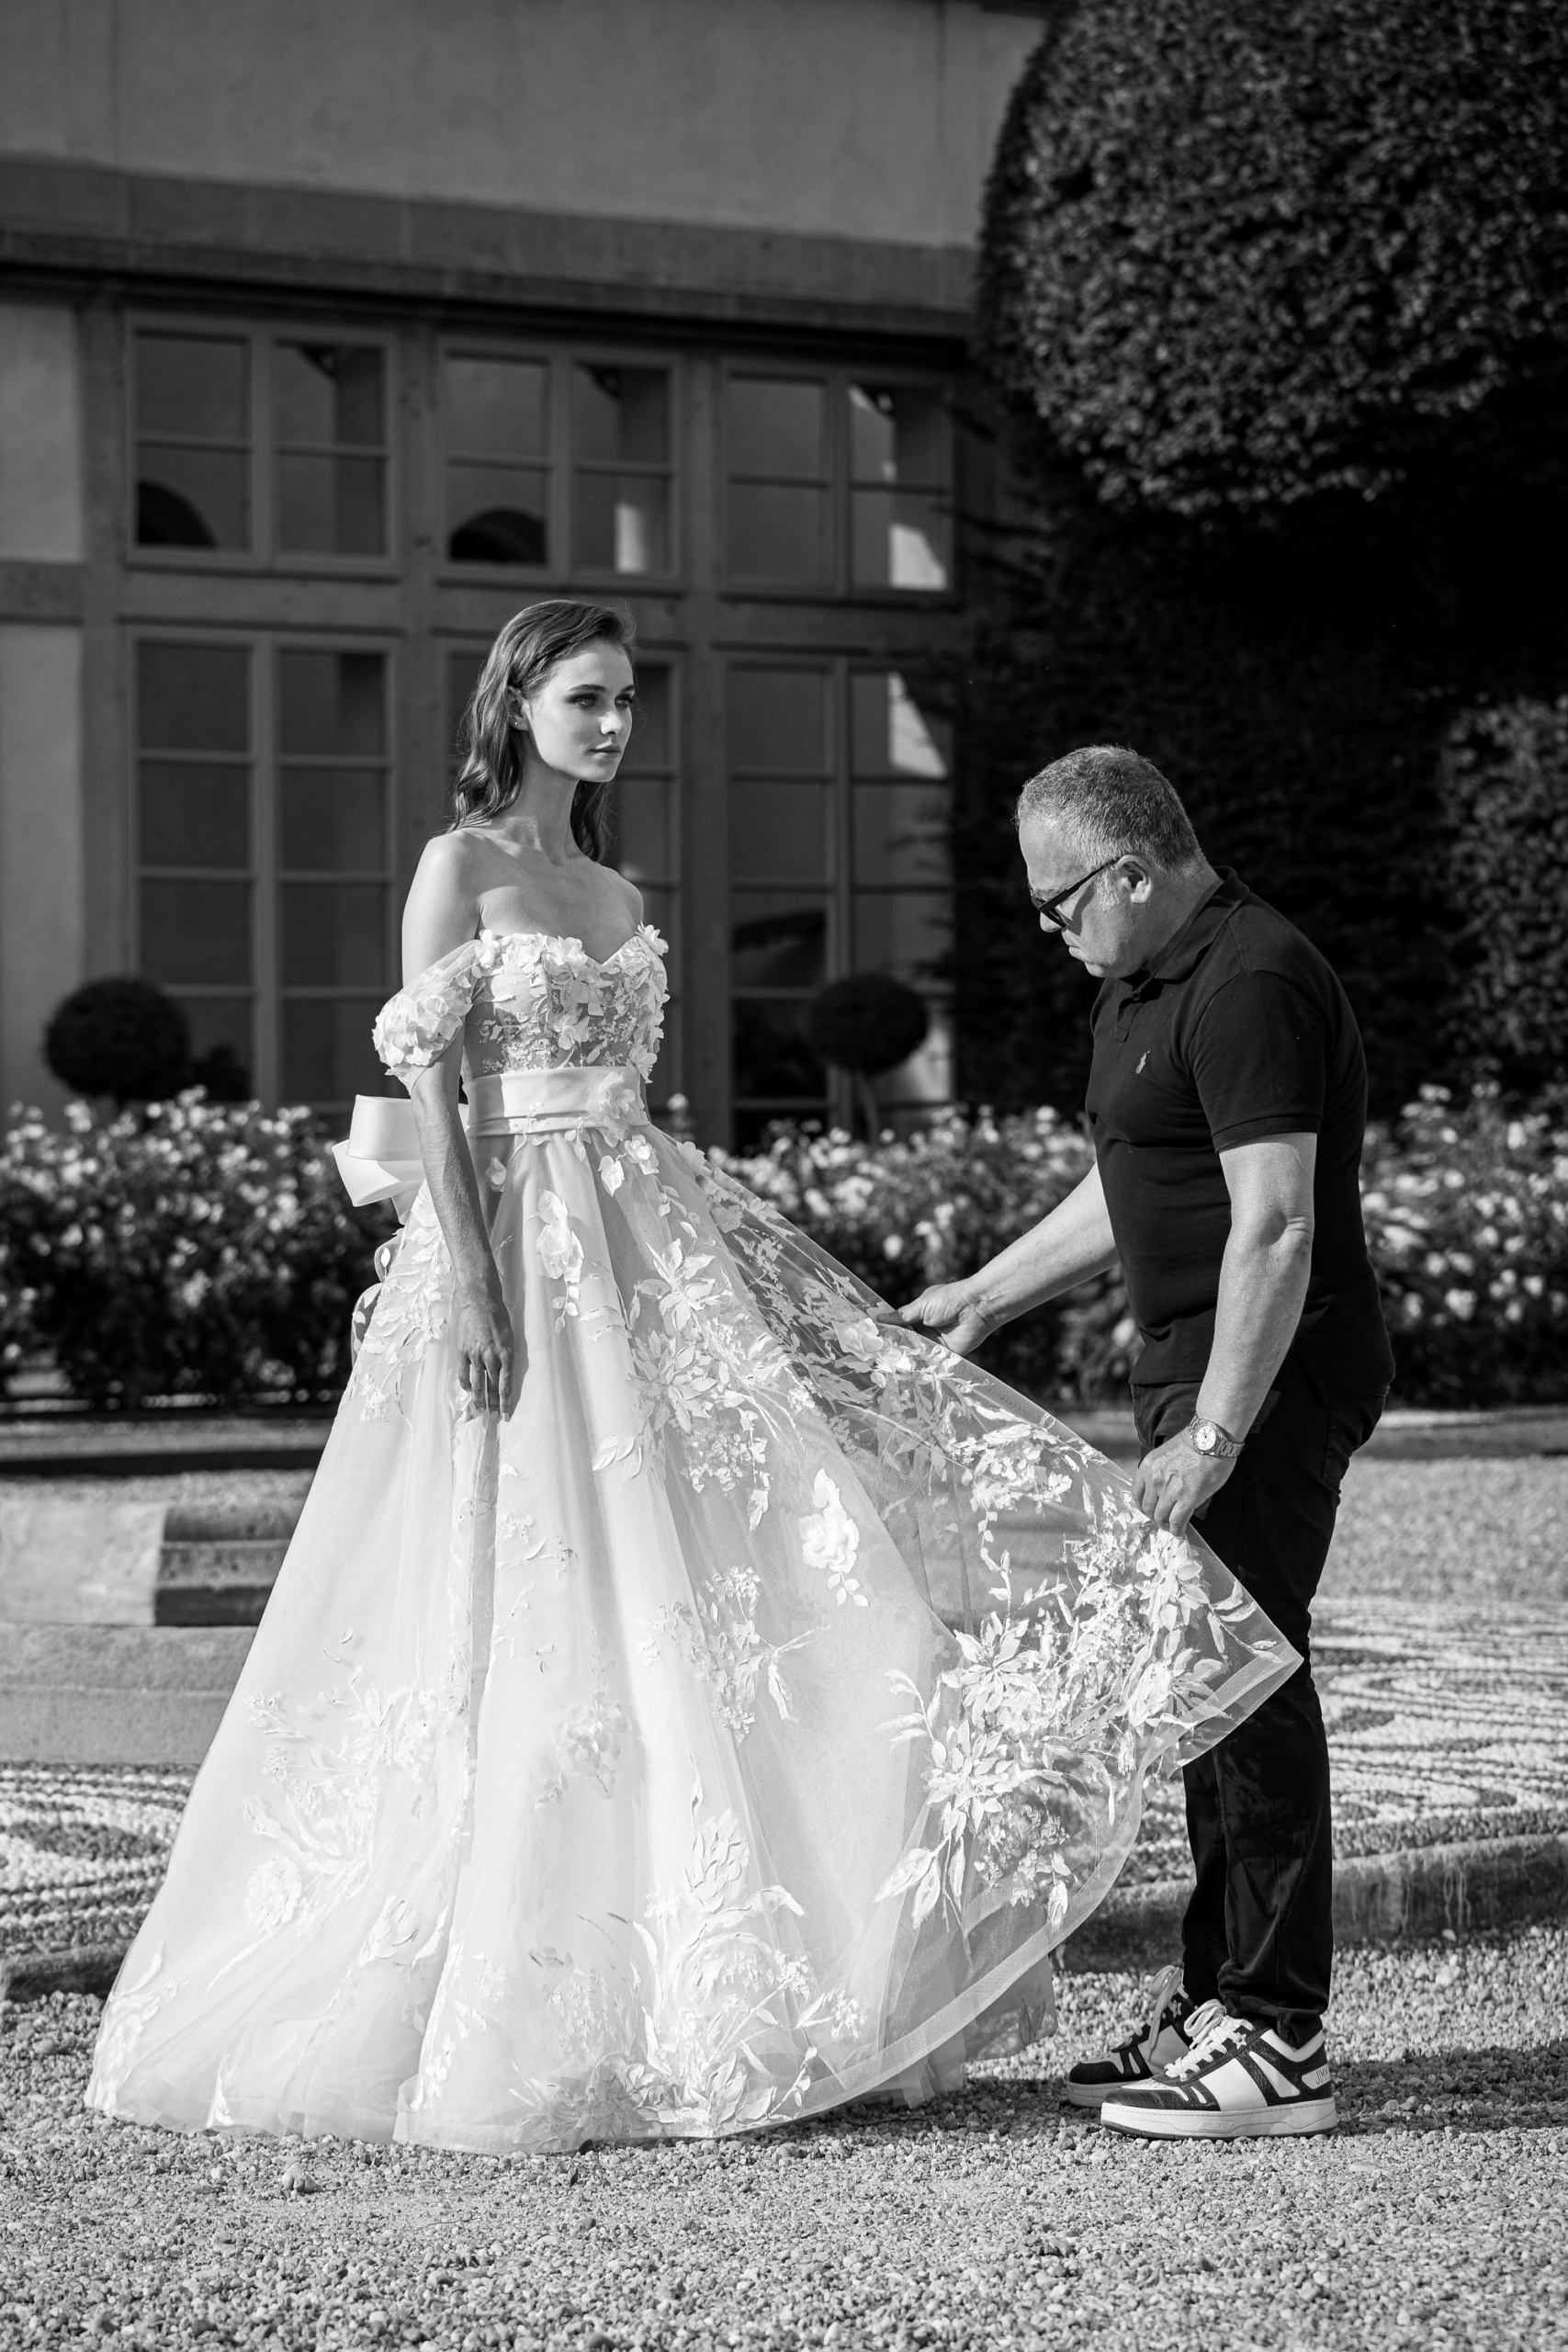 Stylist Stefano Blandaleone: A Master of Great Beauty - Between Art and Style for a Fabulous Wedding - Made in Italy Wedding Dresses for a Vogue Style Look